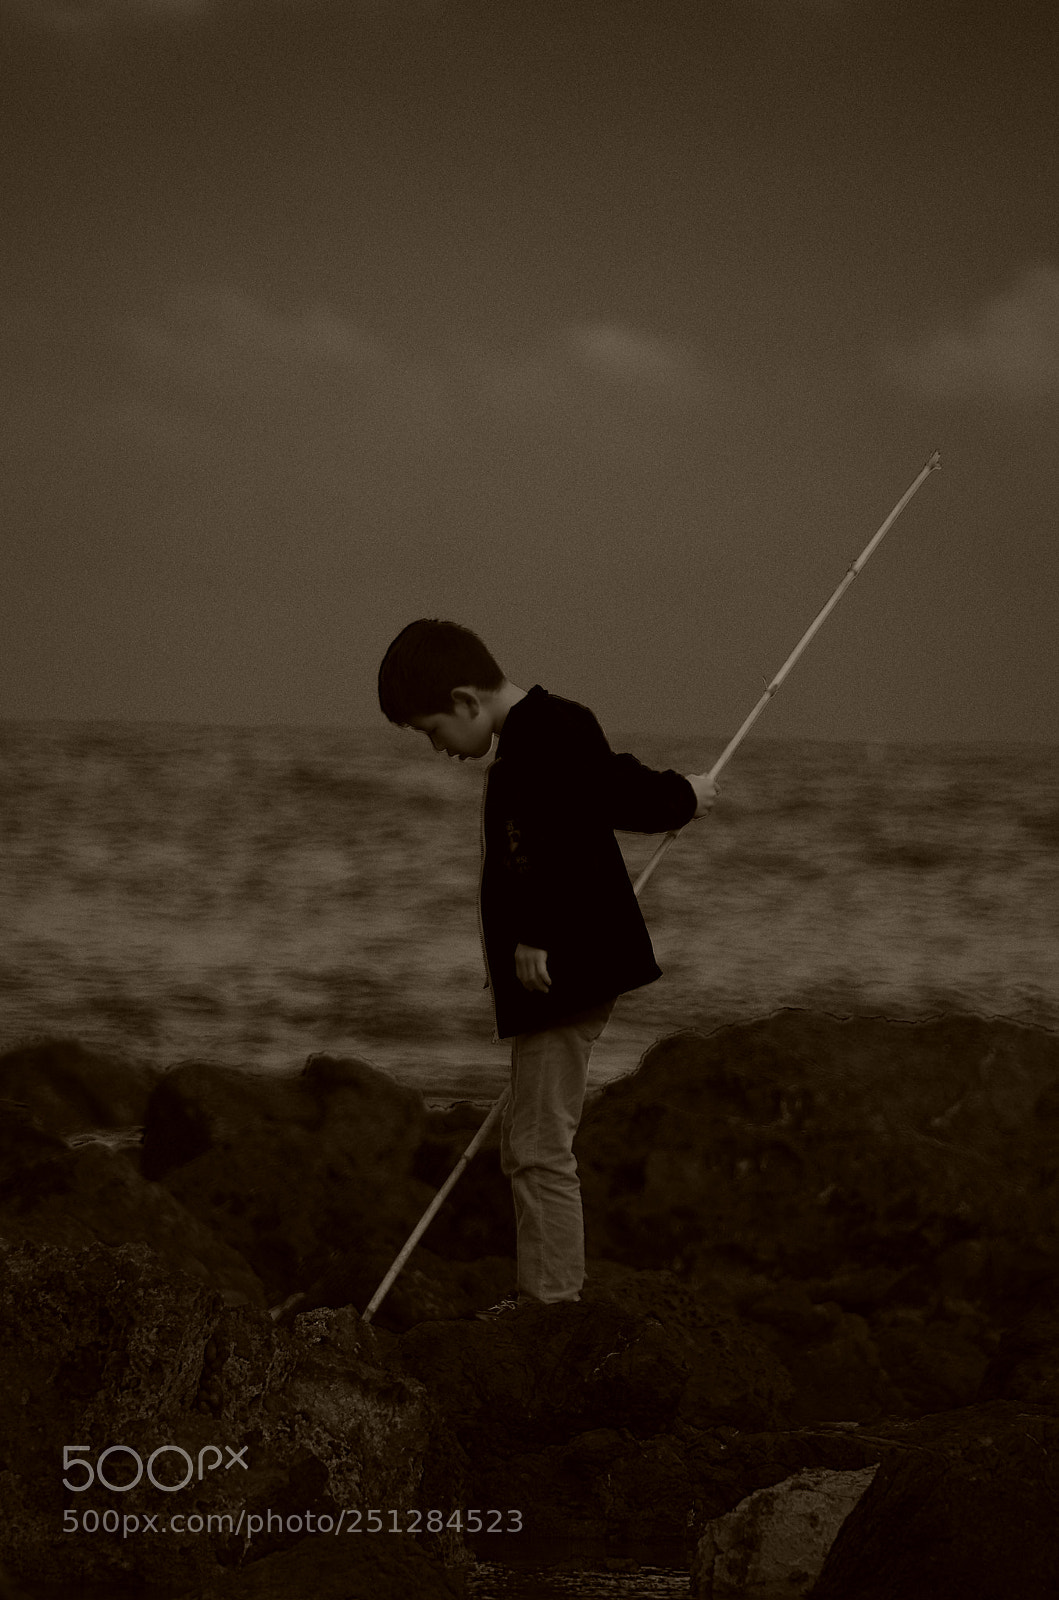 Tamron AF 18-250mm F3.5-6.3 Di II LD Aspherical (IF) Macro sample photo. "Boy and the rod" photography